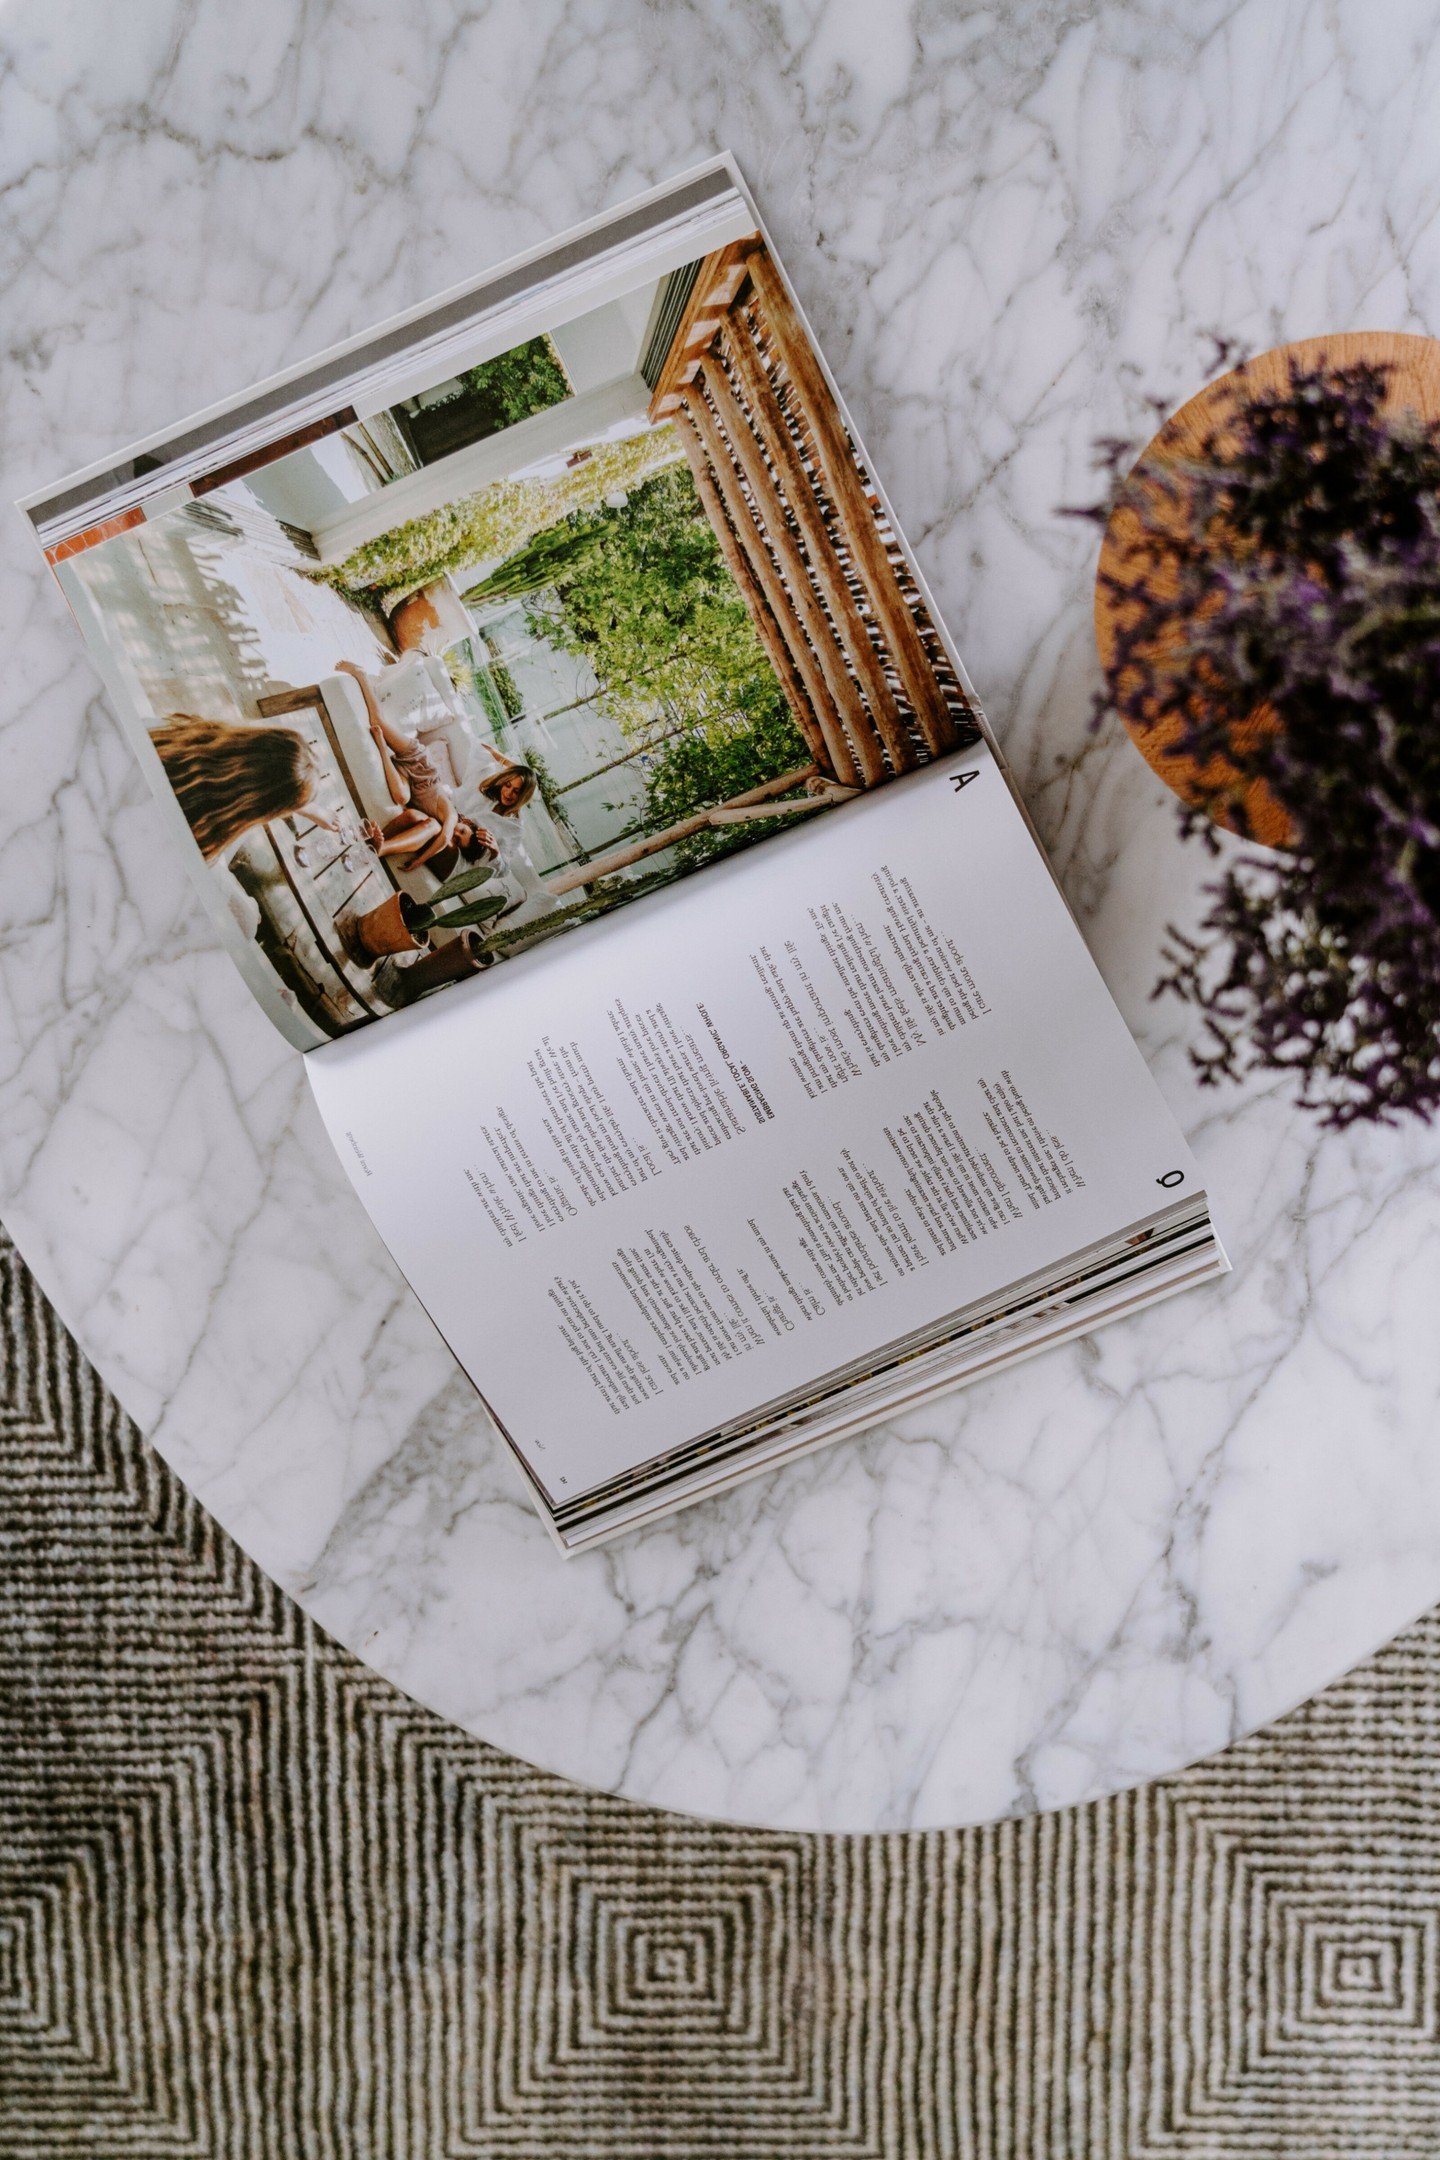 This week's inspiration comes from the harmony of biophilic design. Imagine a living room that seamlessly blends the indoors with the outdoors, where natural elements like wood, stone, and plants create a space that's alive and connected to nature. S